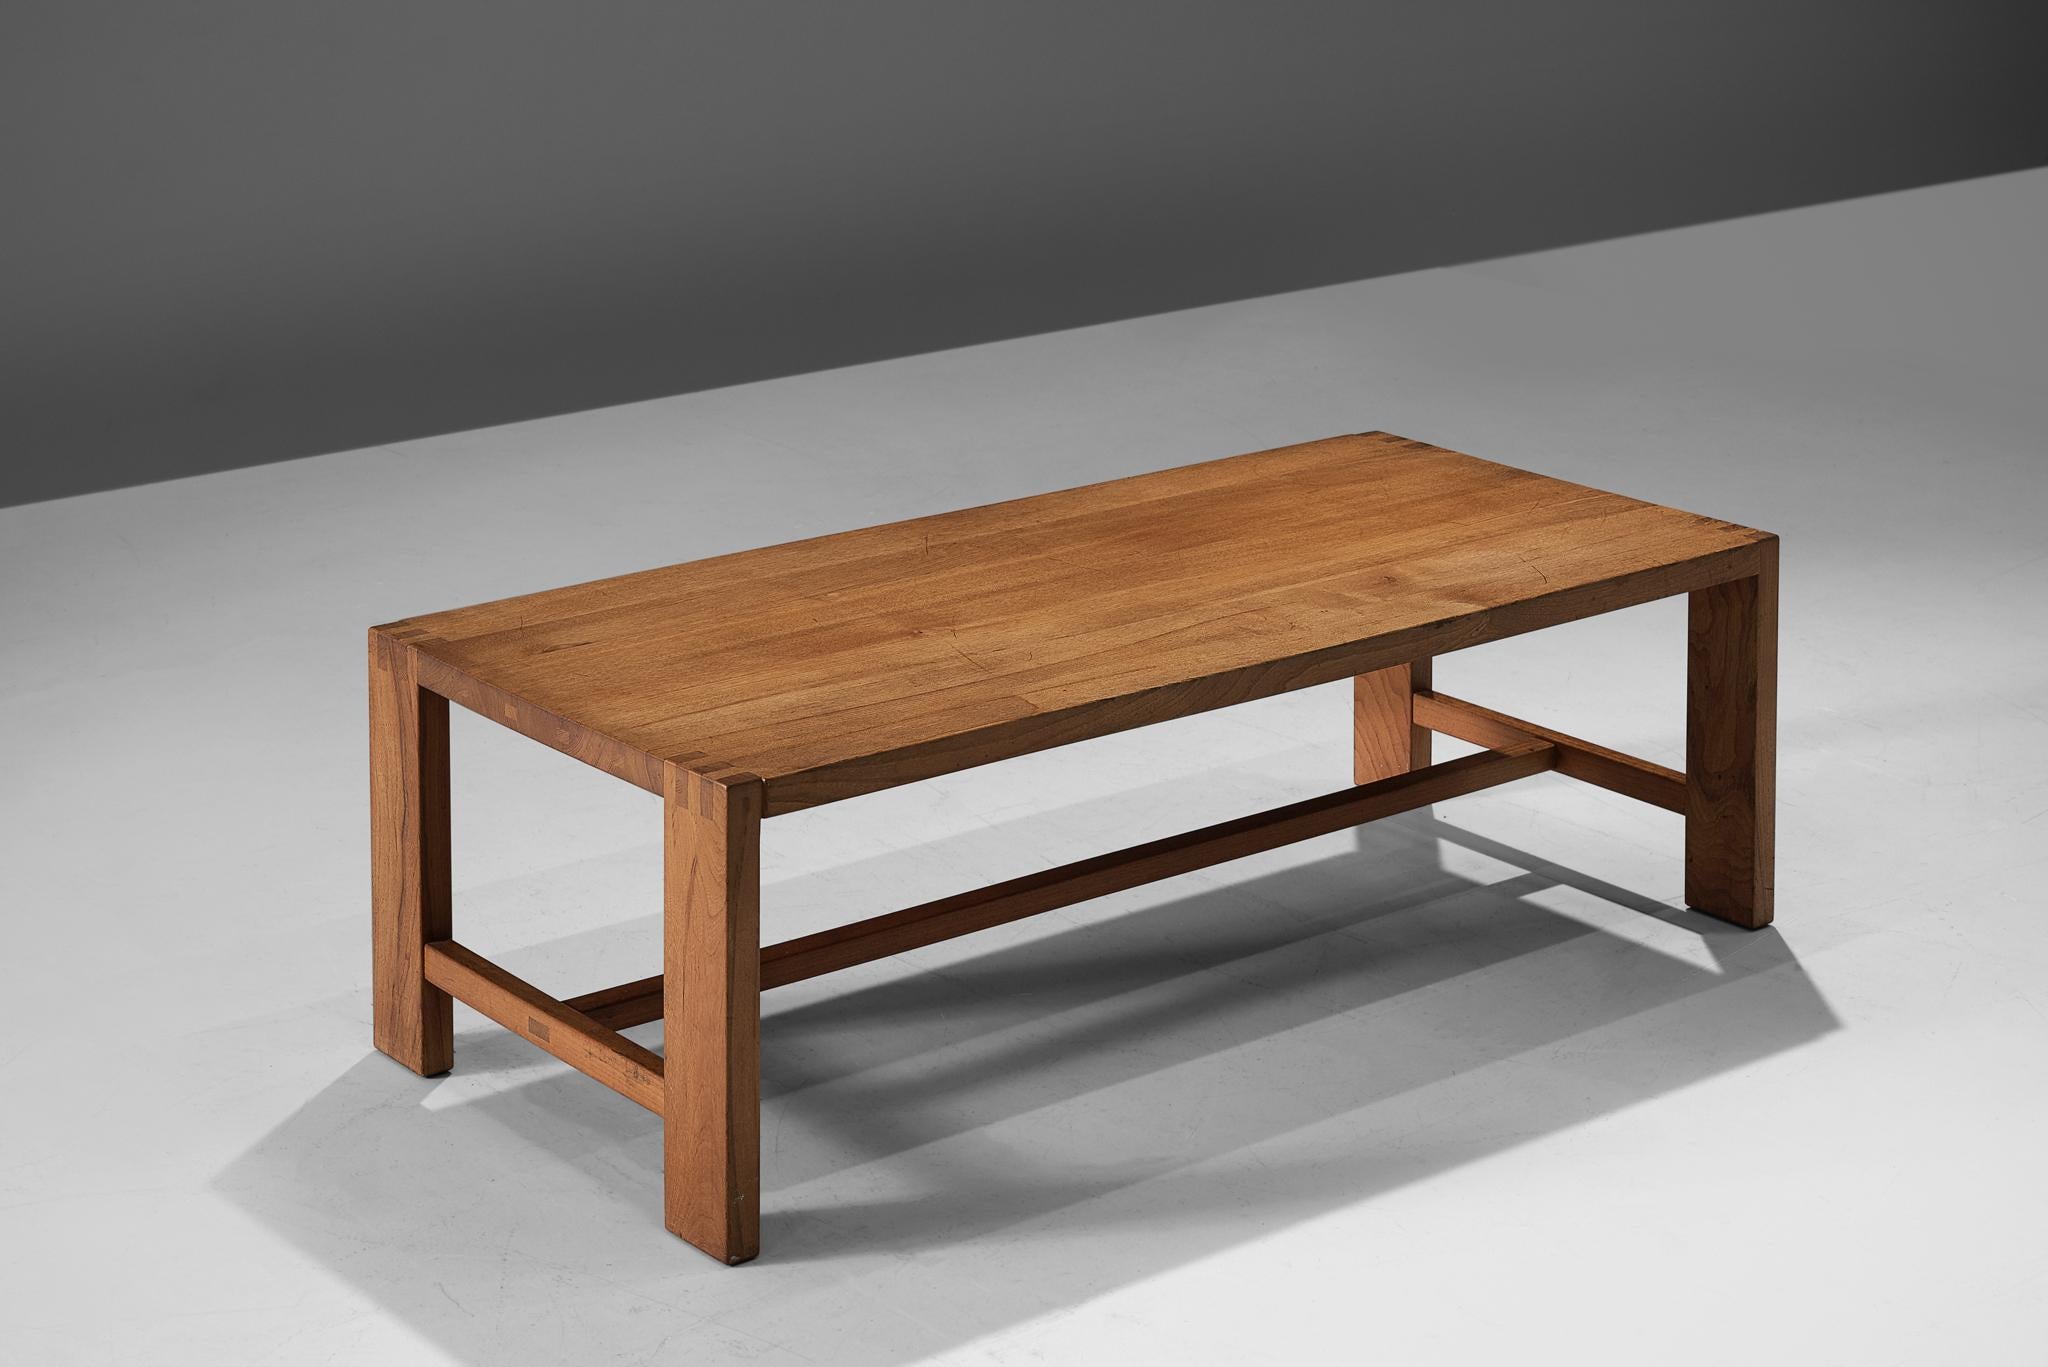 Pierre Chapo, T06A coffee table, solid elm, France, 1960.

A rectangular-shaped coffee table by Pierre Chapo from the 1960s. The cocktail table is modest and rationalist in its design with a H-shaped rod that connects the legs. All attention goes